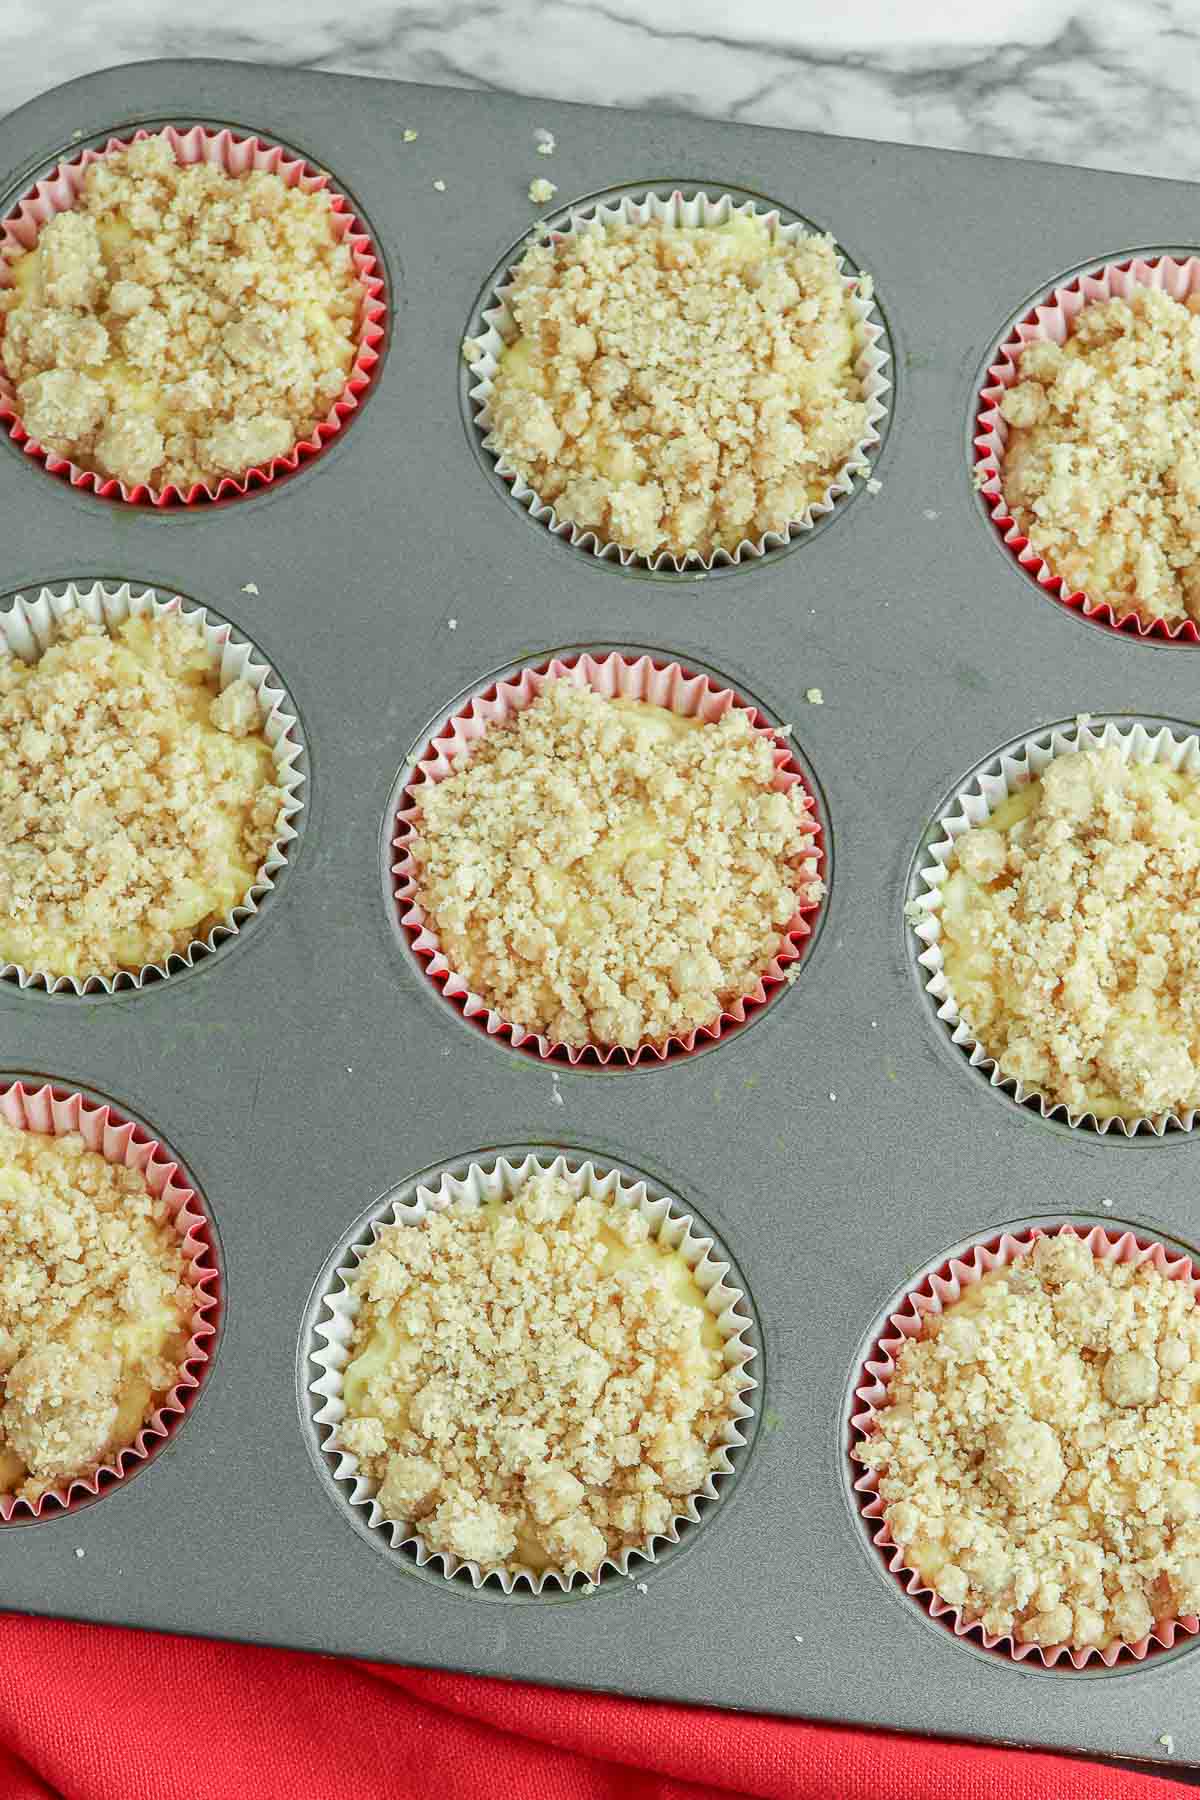 Cinnamon crumble topping spread over muffins in a muffin tin.